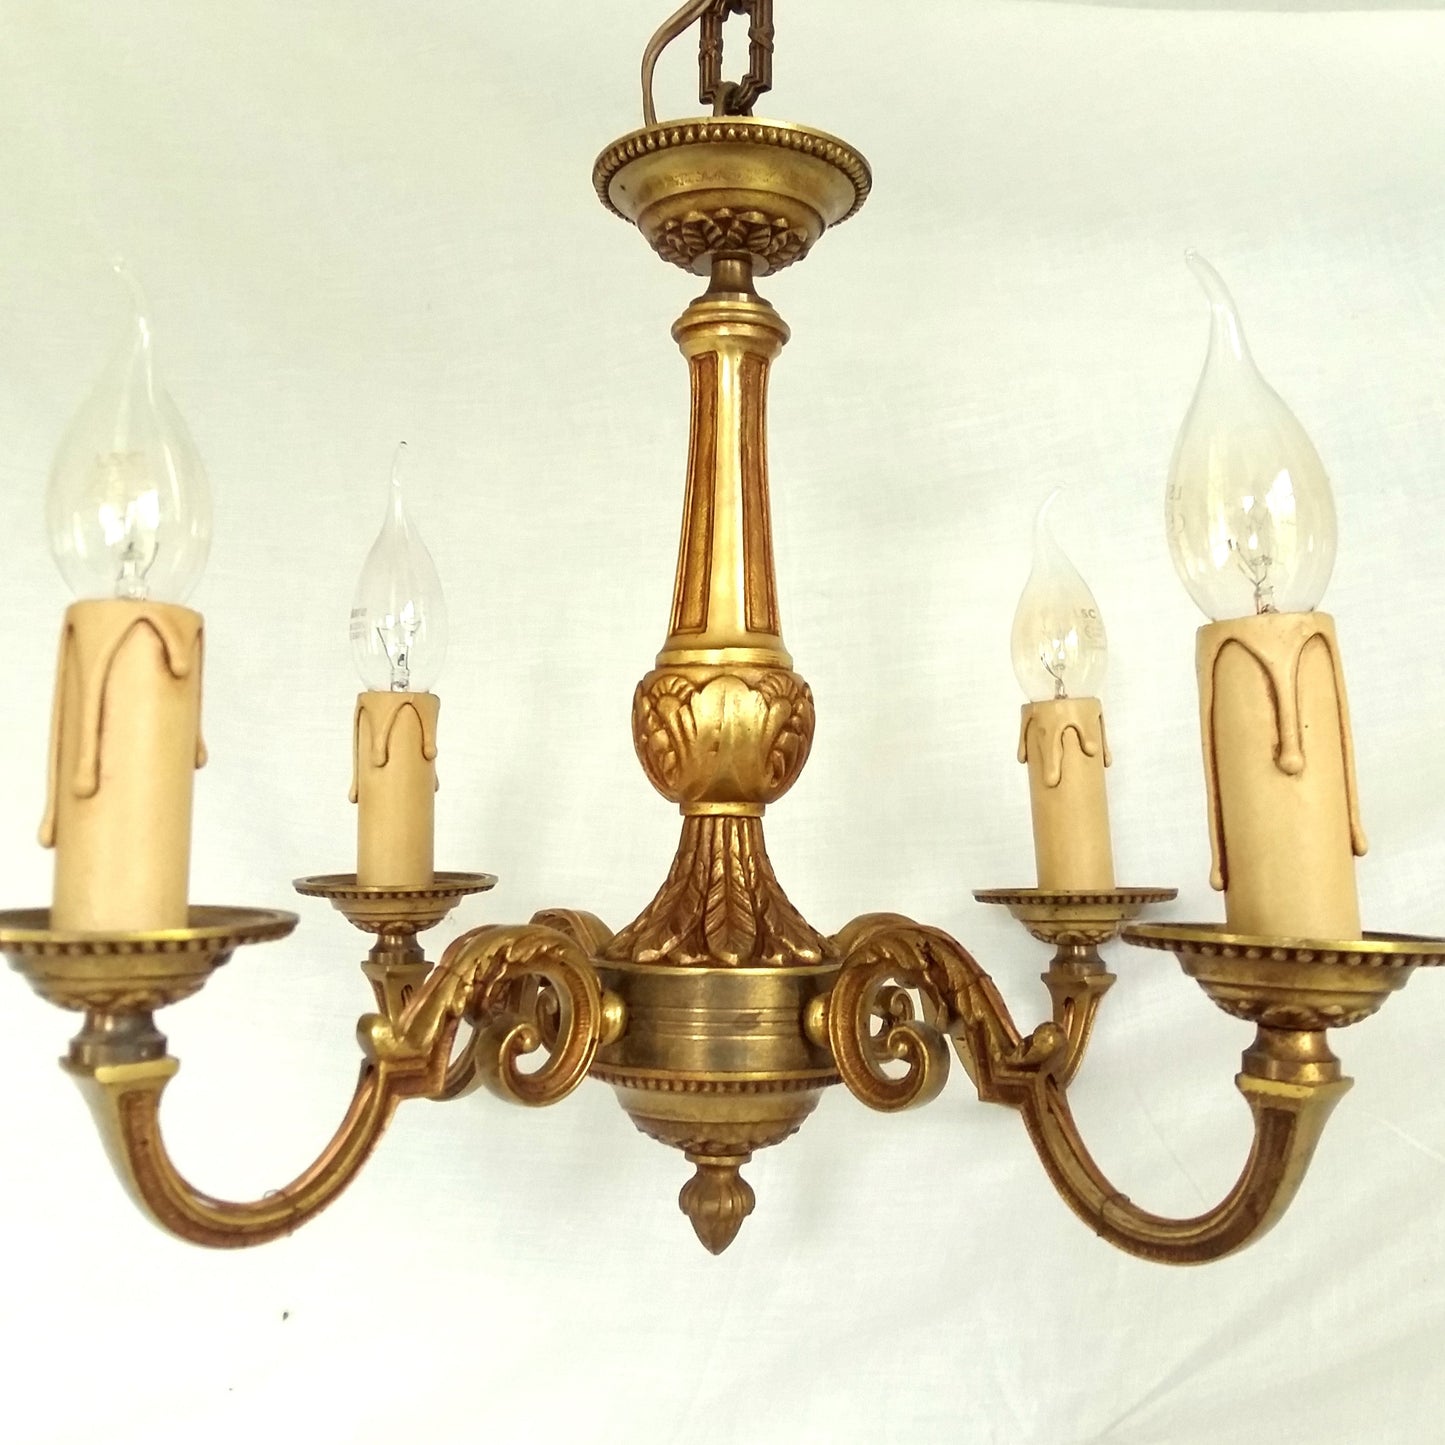 Antique Bronze Ornate 4 Arm Chandelier from Tiggy & Pip - Just €290! Shop now at Tiggy and Pip